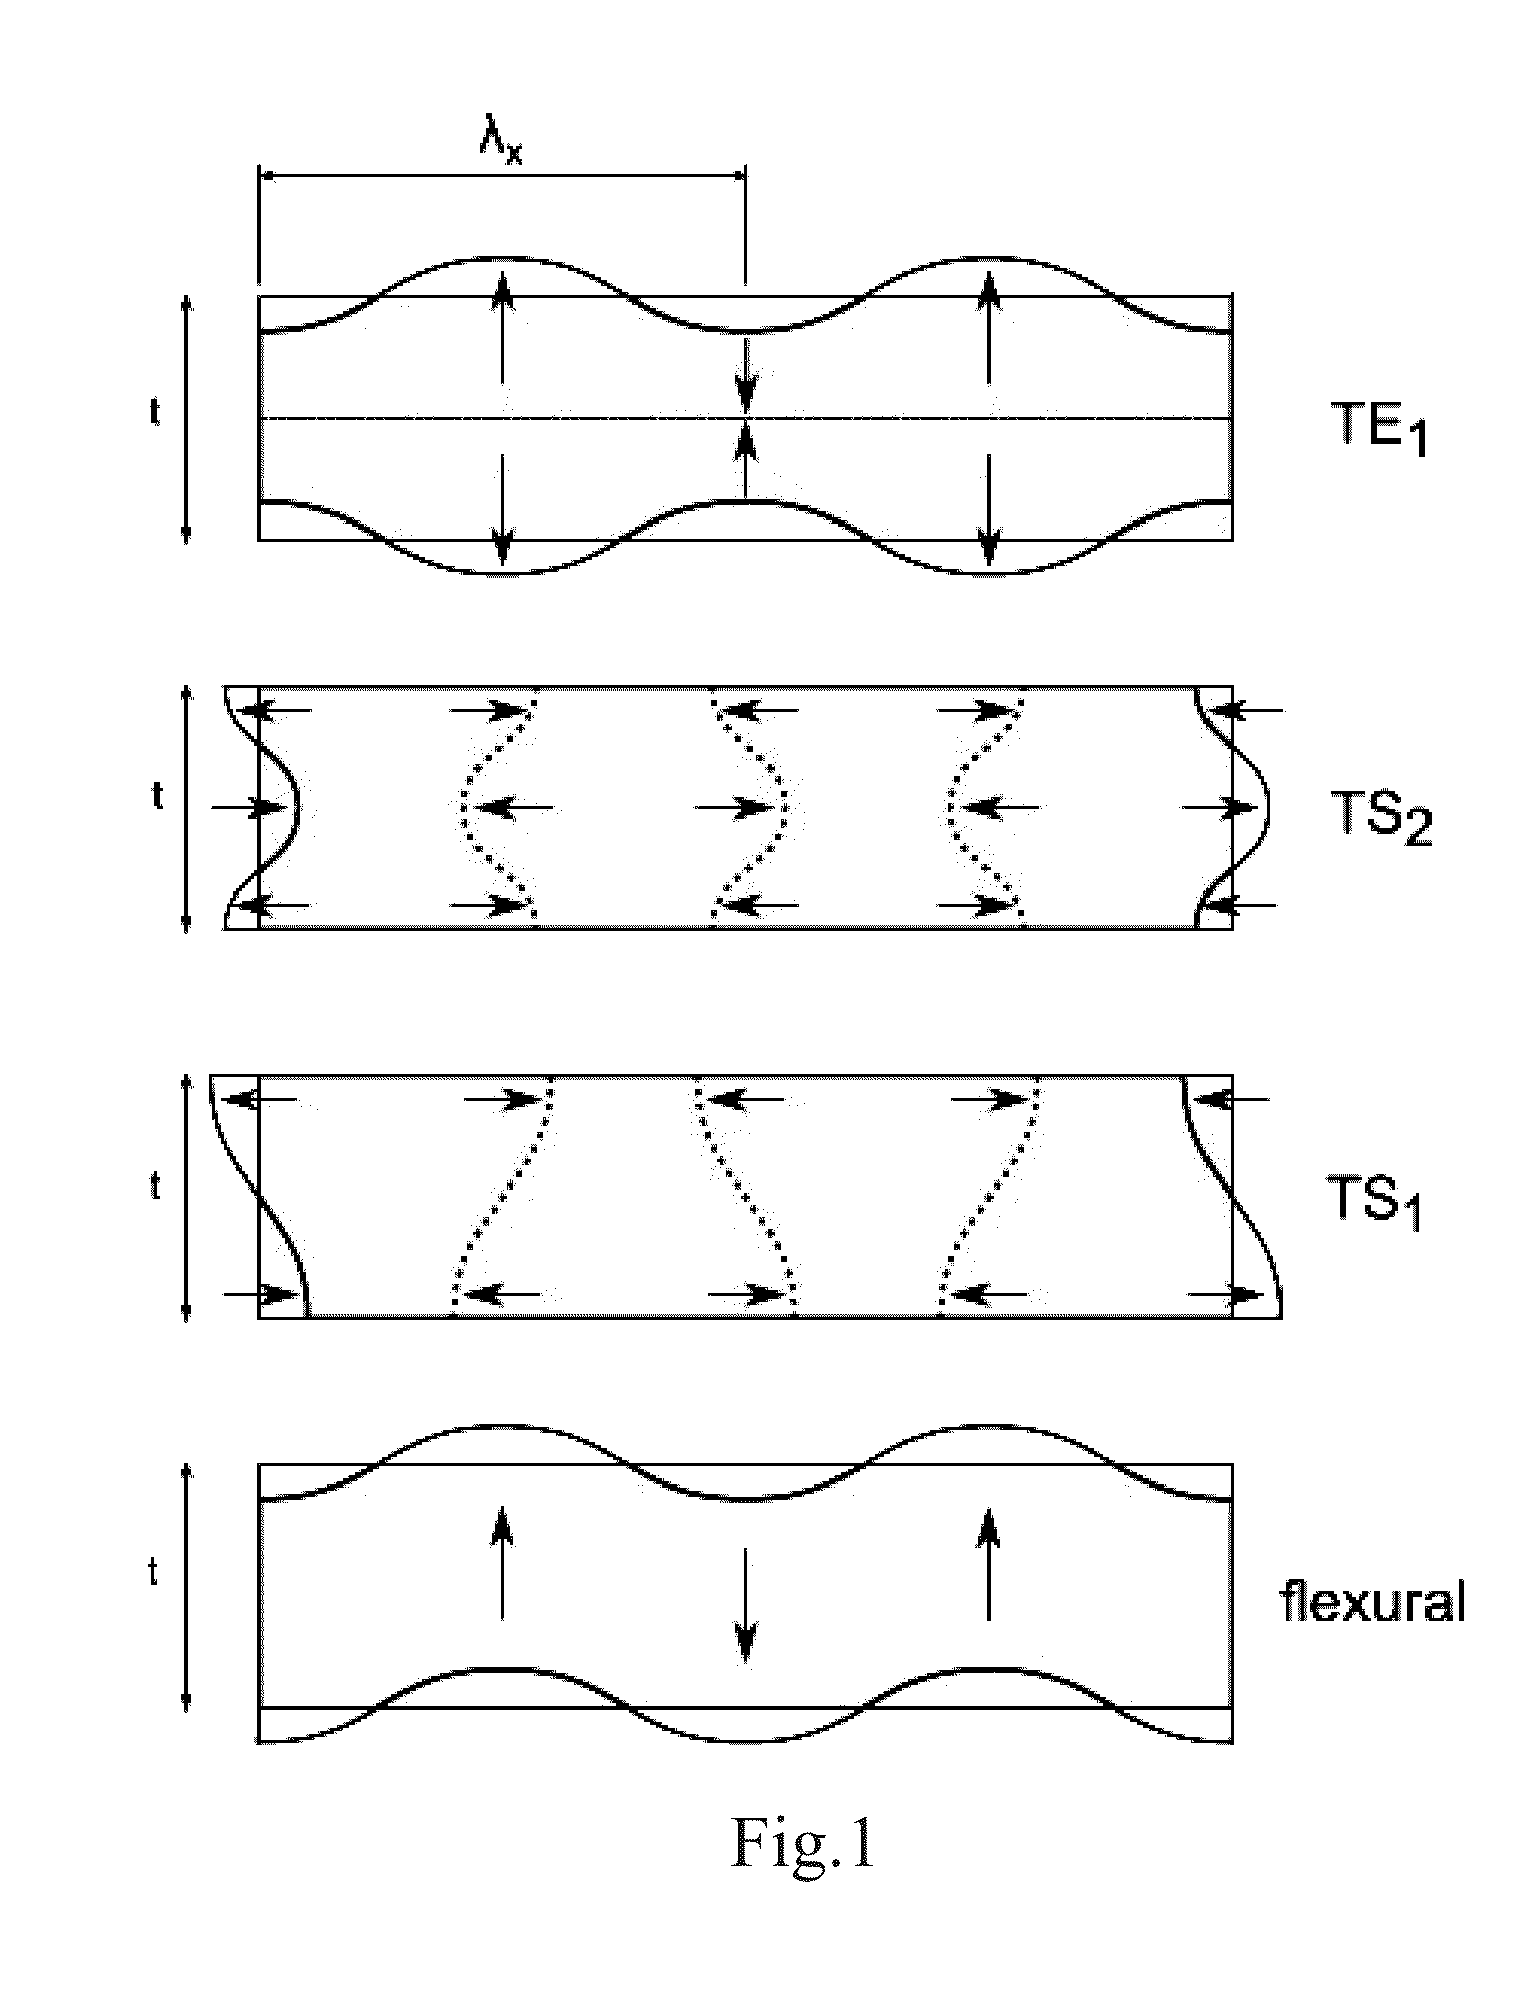 Wide-band acoustically coupled thin-film baw filter